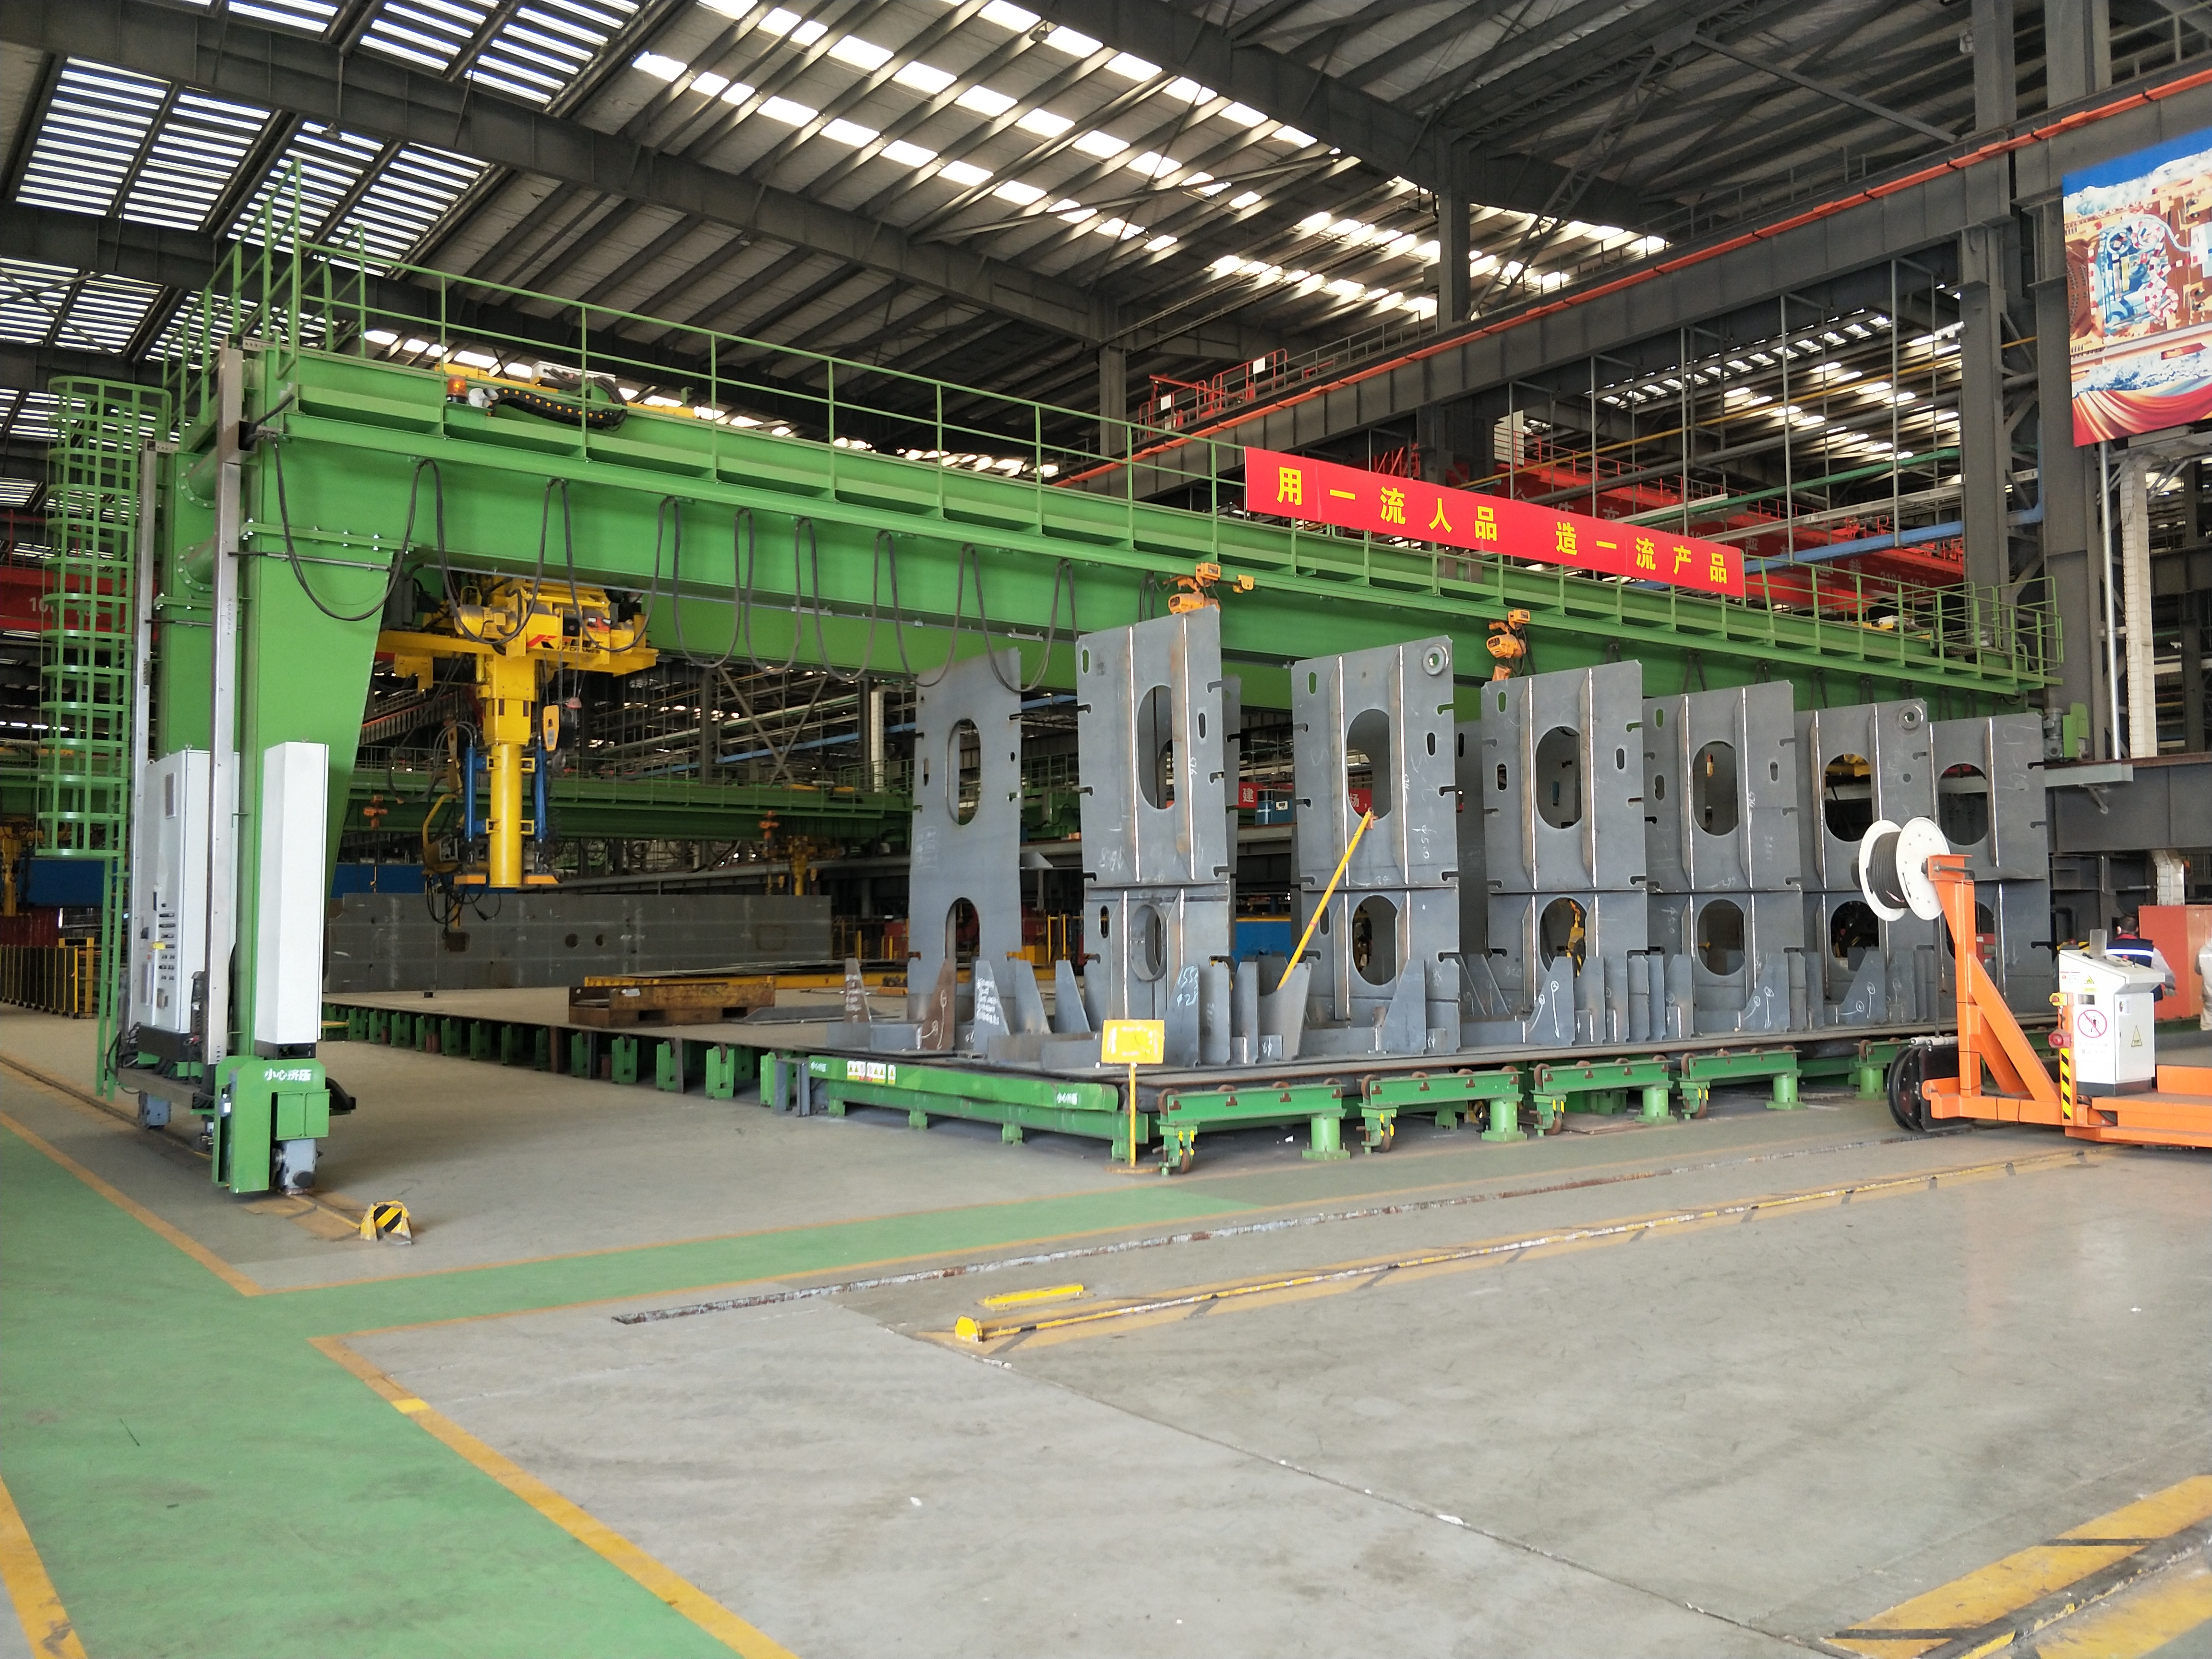 Customized Gantry crane's installation and precision requirements